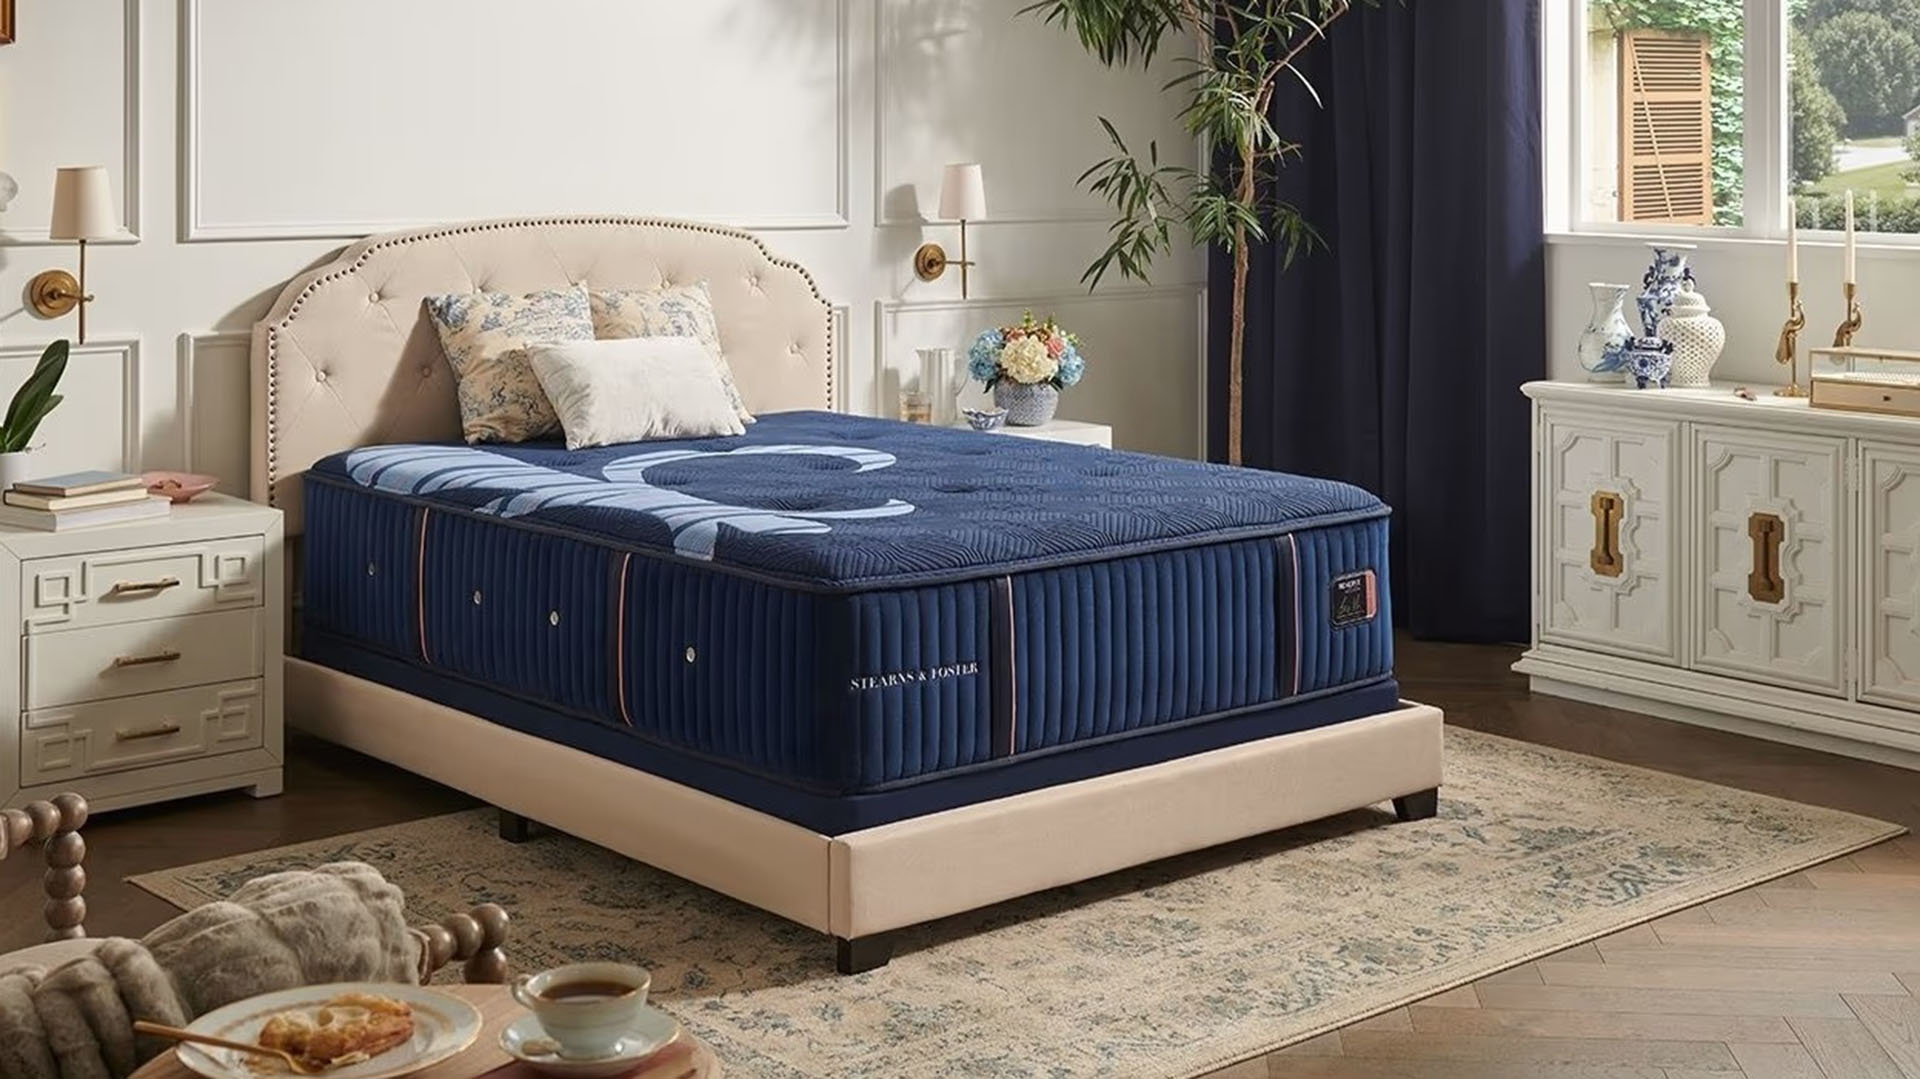 Stearns & Foster mattresses in Erie are designed with comfort and support in mind.